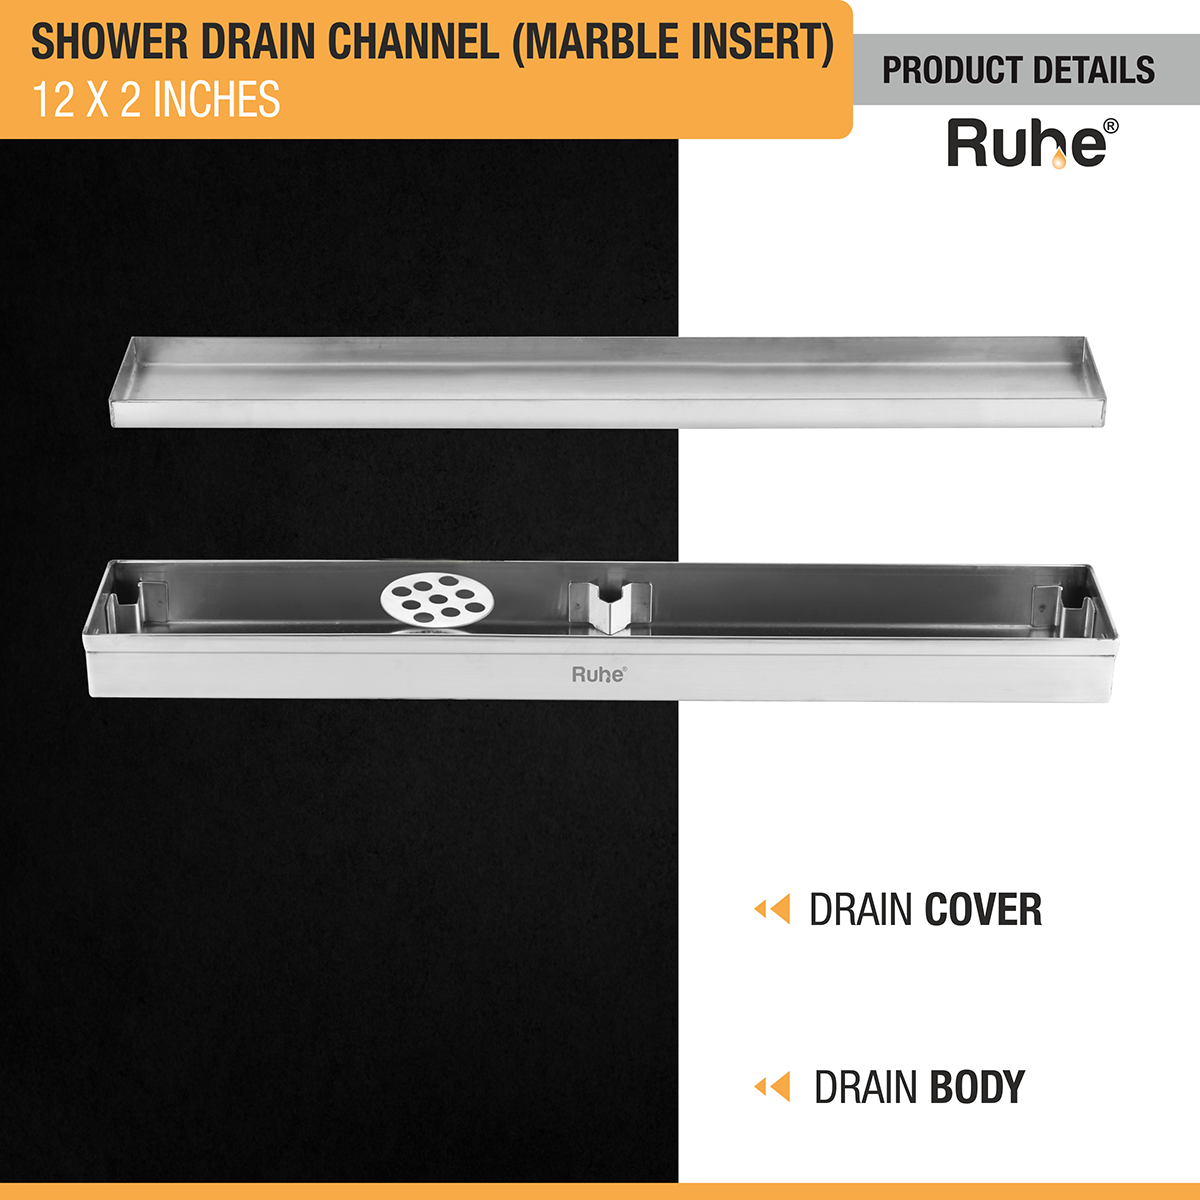 Marble Insert Shower Drain Channel (12 x 2 Inches) (304 Grade) with drain cover and drain body